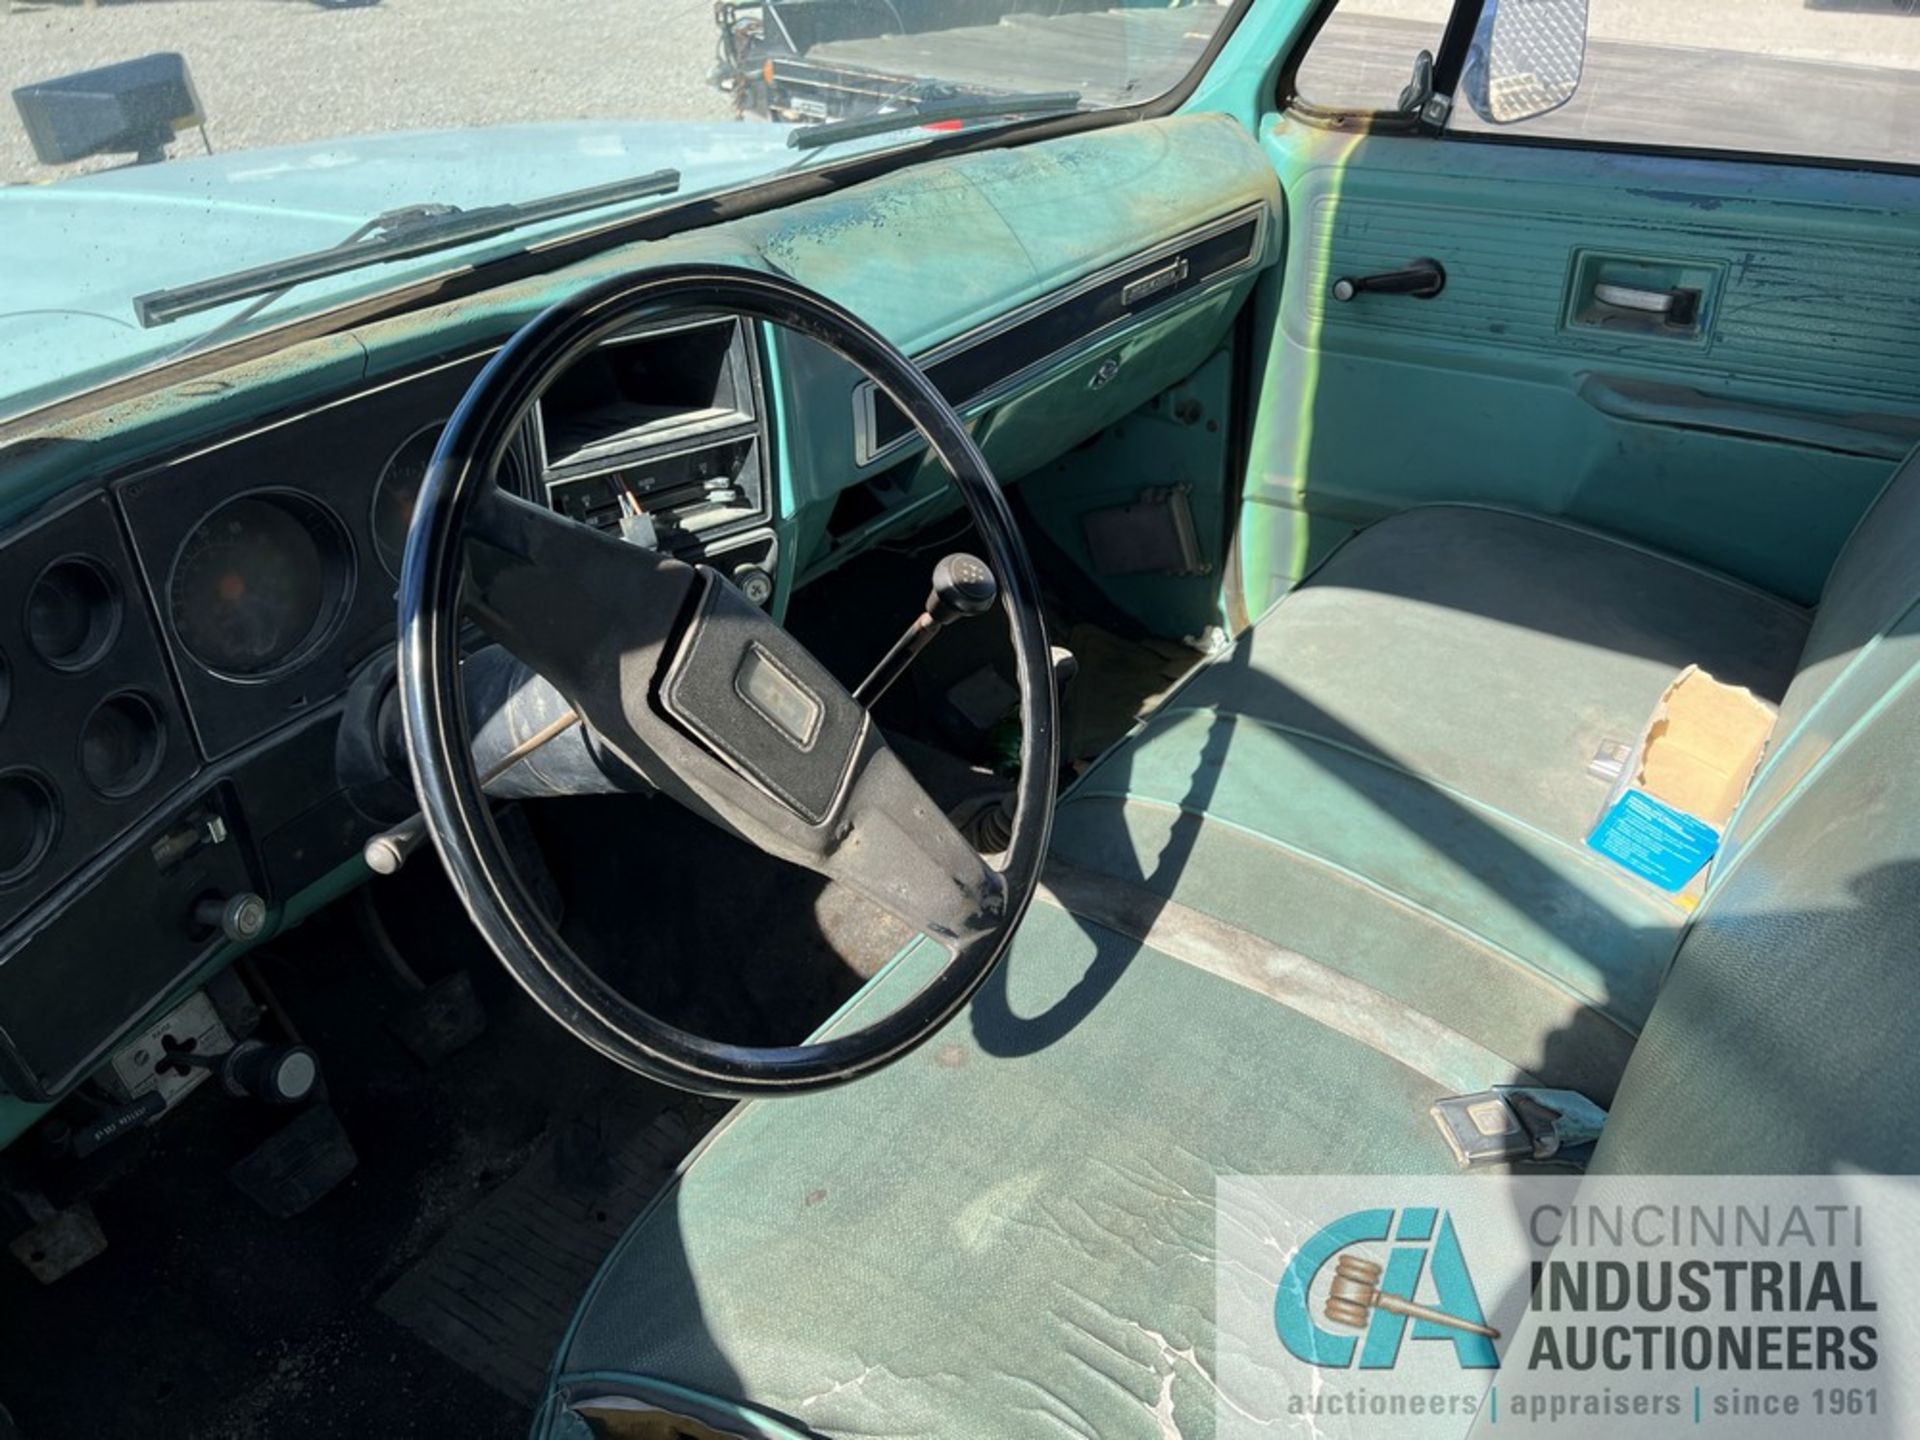 1978 CHEVY CUSTOM DELUX 2 WITH SNOW PLOW; VIN CKU268F128647, GASOLINE ENGINE, AUTOMATIC - Image 6 of 10